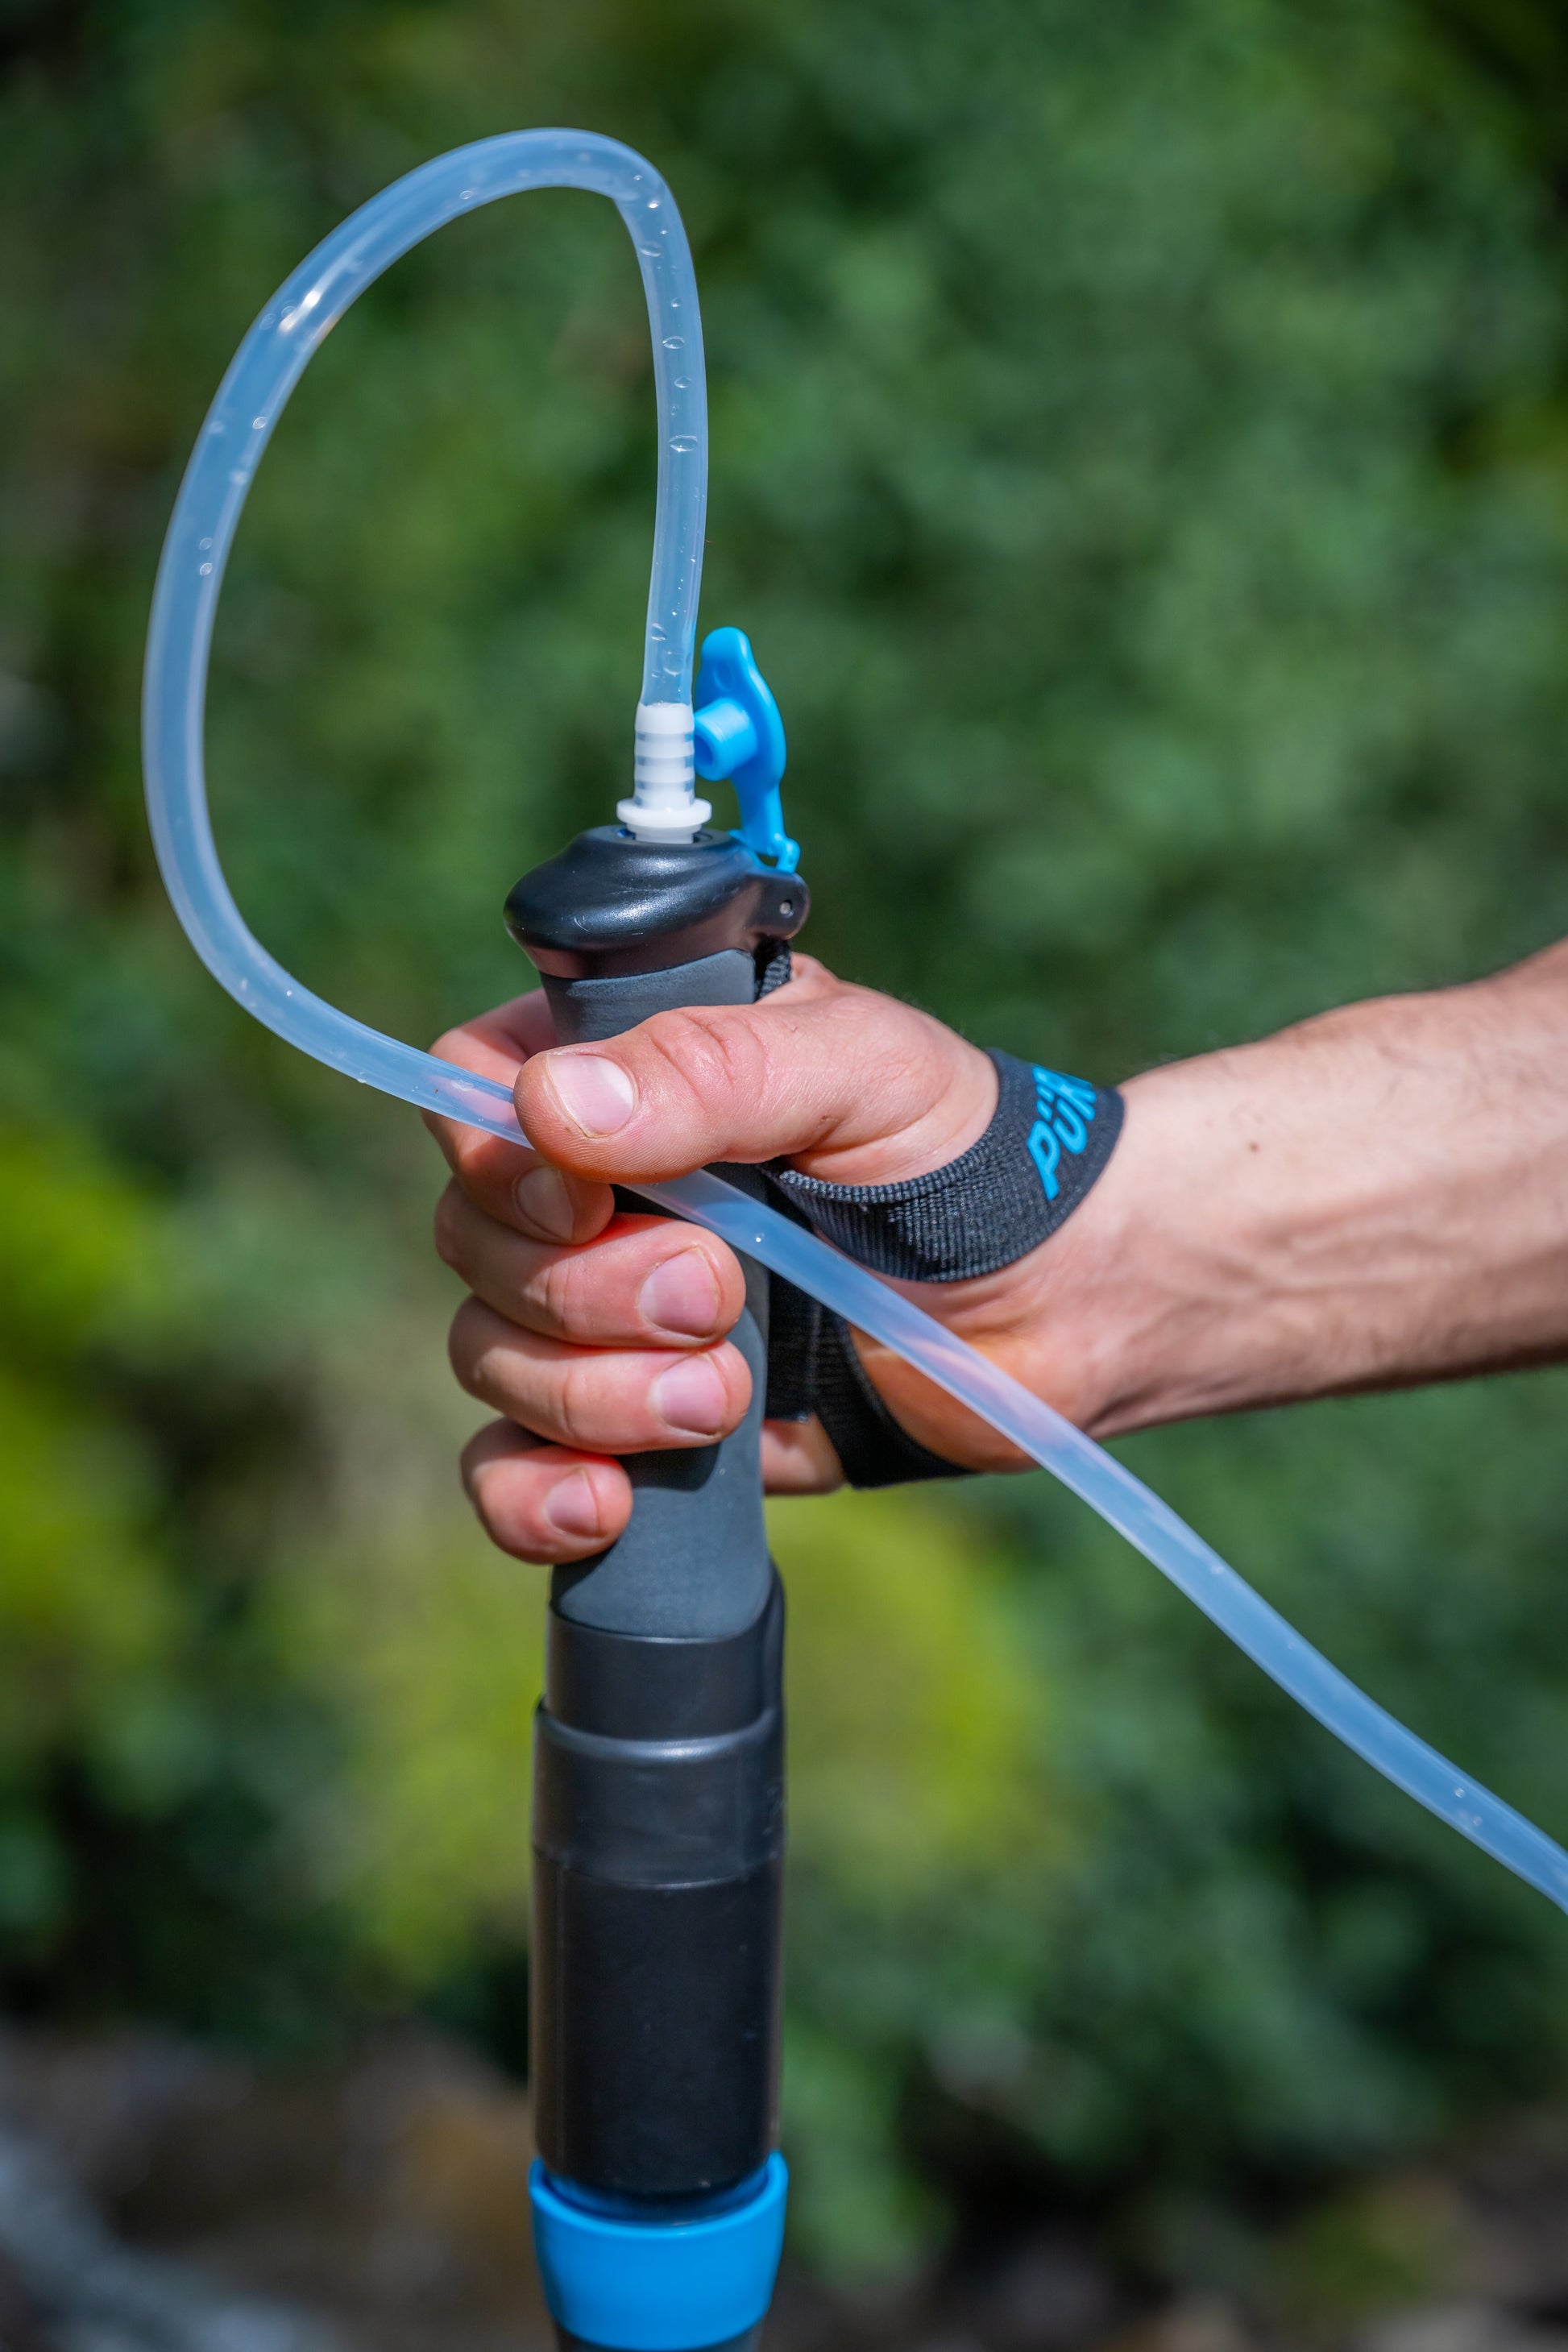 PurTrek ingeniously incorporates both filter and pump, right in the grip of the trekking pole